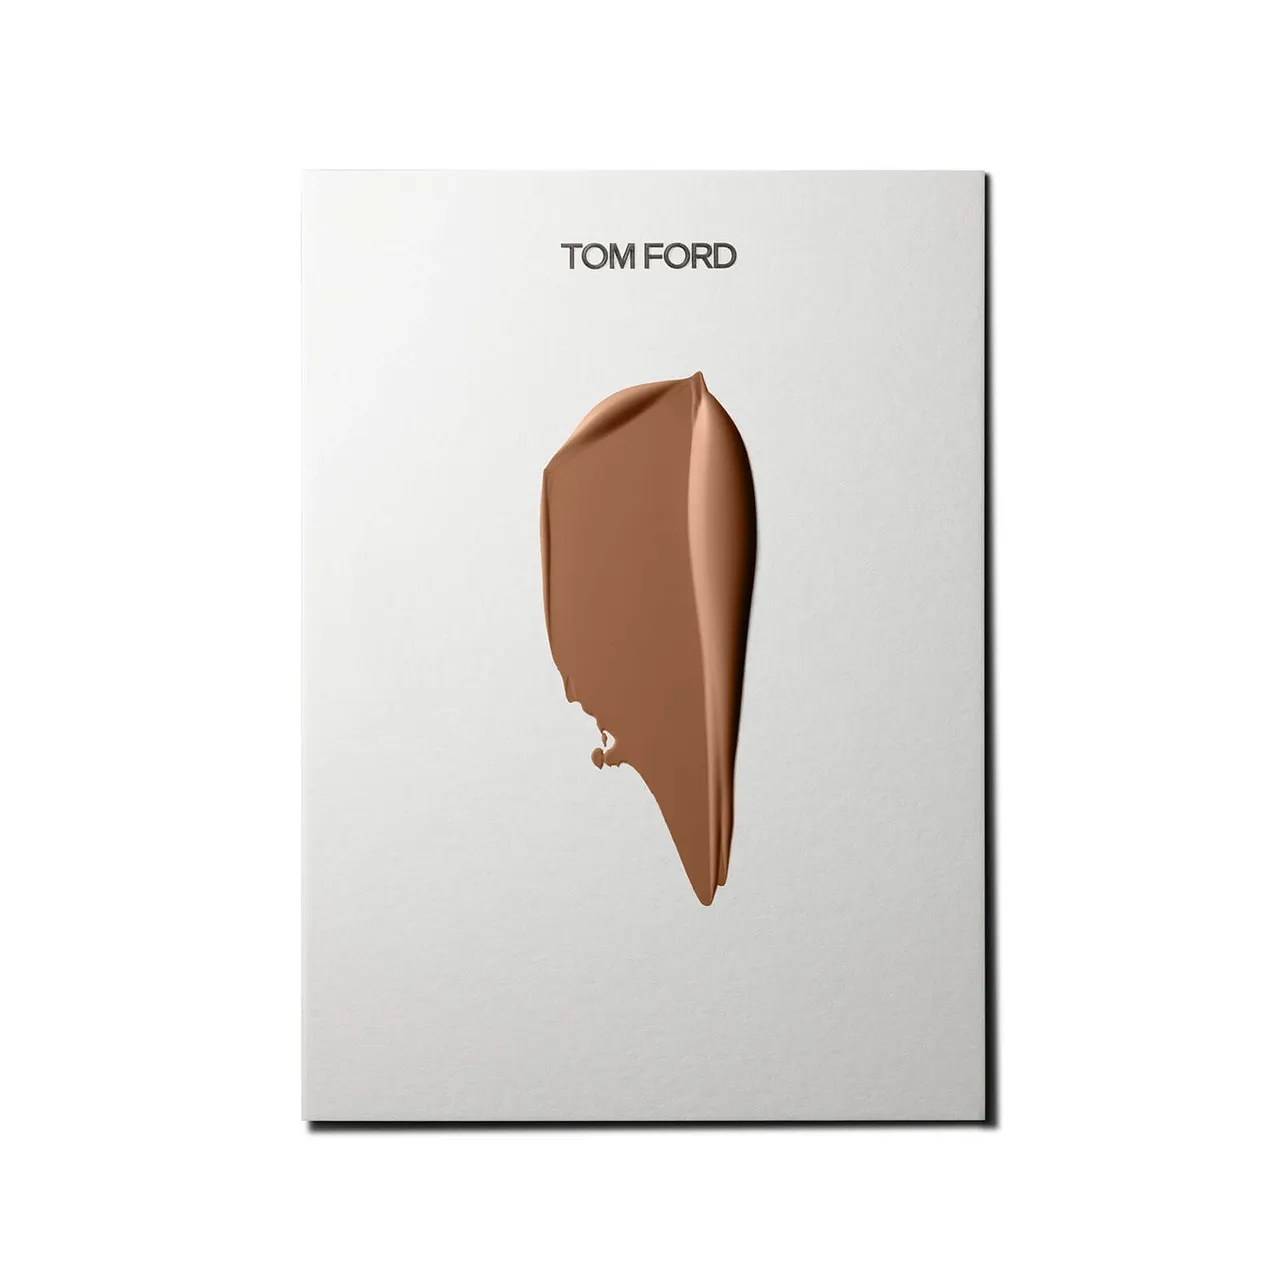 Tom Ford Traceless Soft Matte Foundation 30ml (Various Shades) - Warm Honey